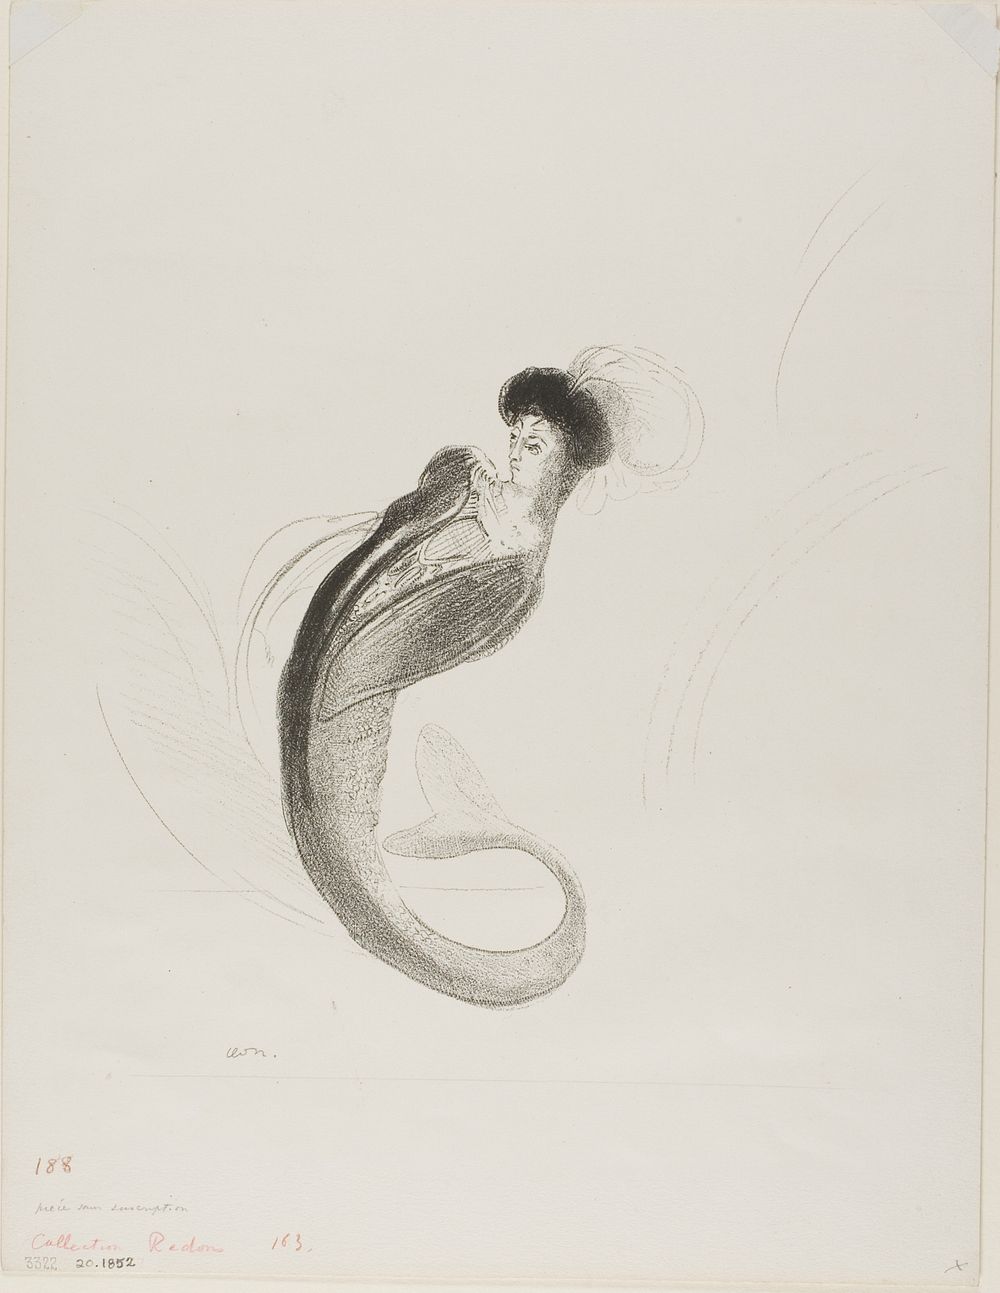 Untitled Trial Lithograph by Odilon Redon